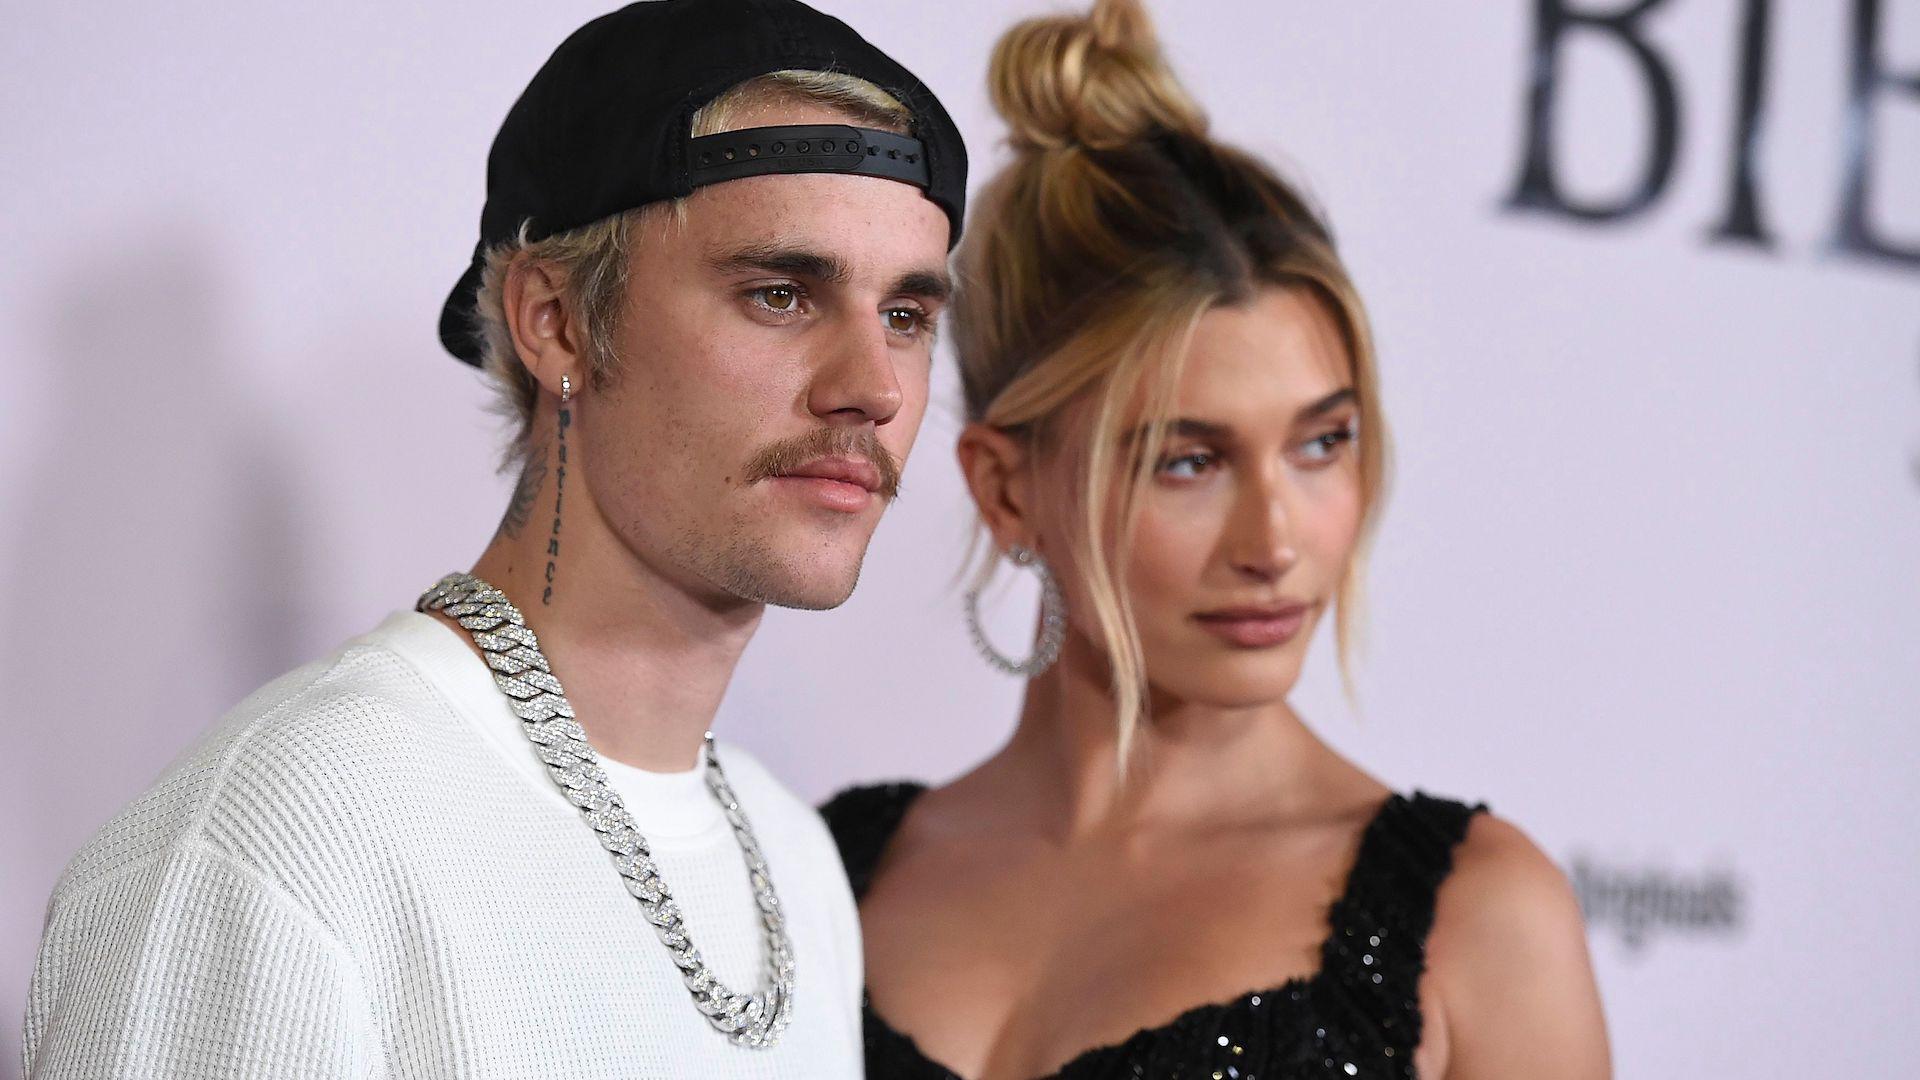 Justin Bieber's New Song 'Intentions' Is About How Hailey Baldwin